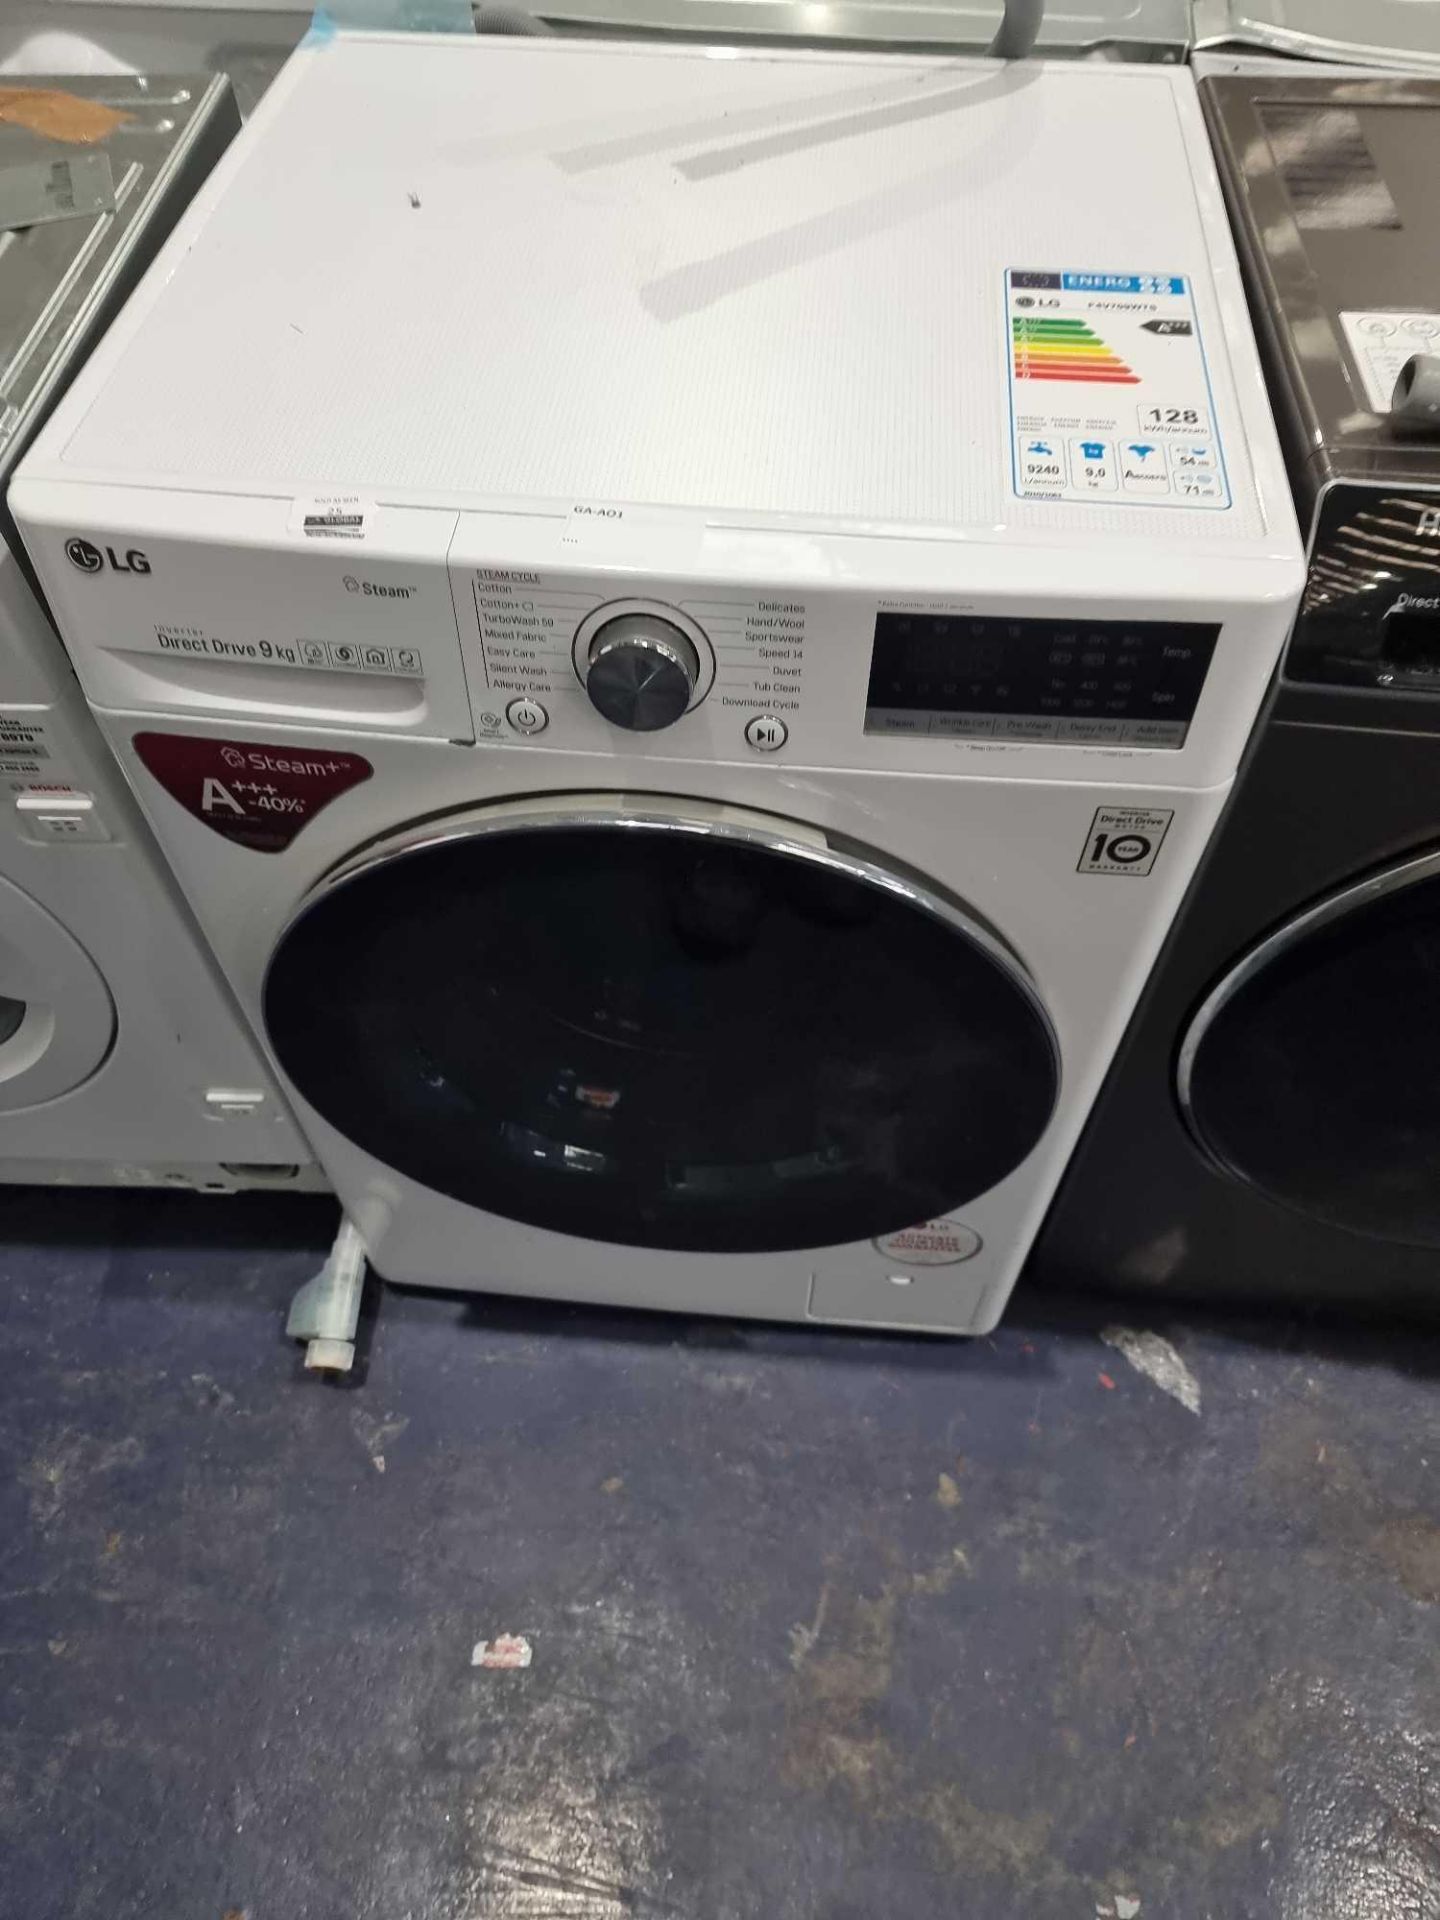 (Sp) RRP £500 Lot To Contain 1 LG Fav309Wne 9Kg Washing Machine With 1400 Rpm - White - Image 2 of 2